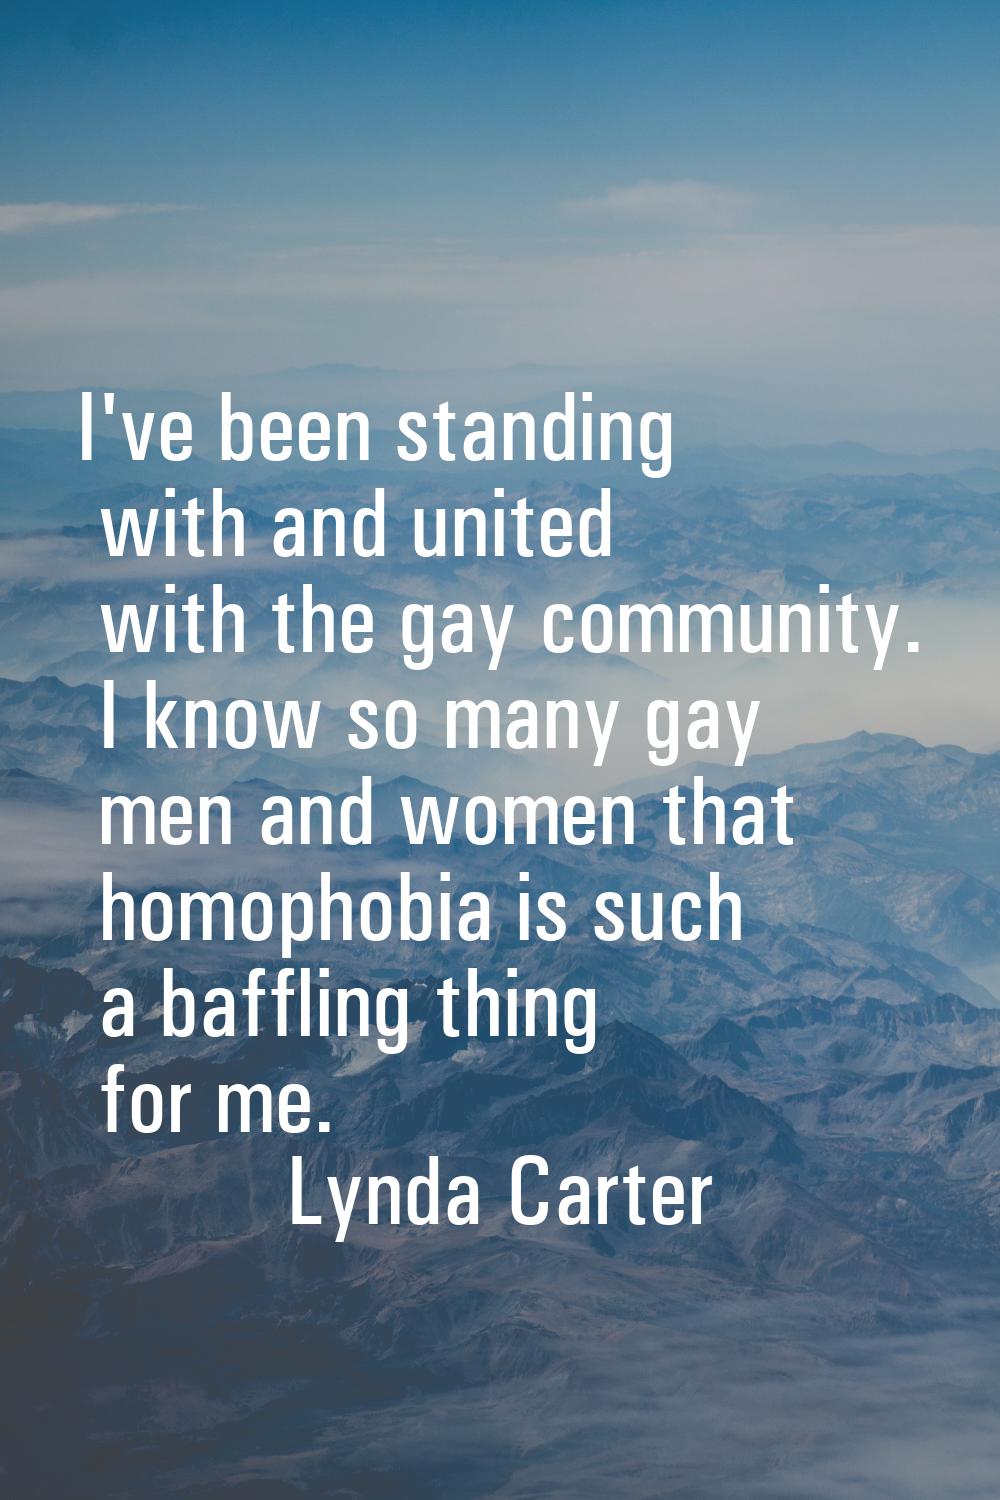 I've been standing with and united with the gay community. I know so many gay men and women that ho